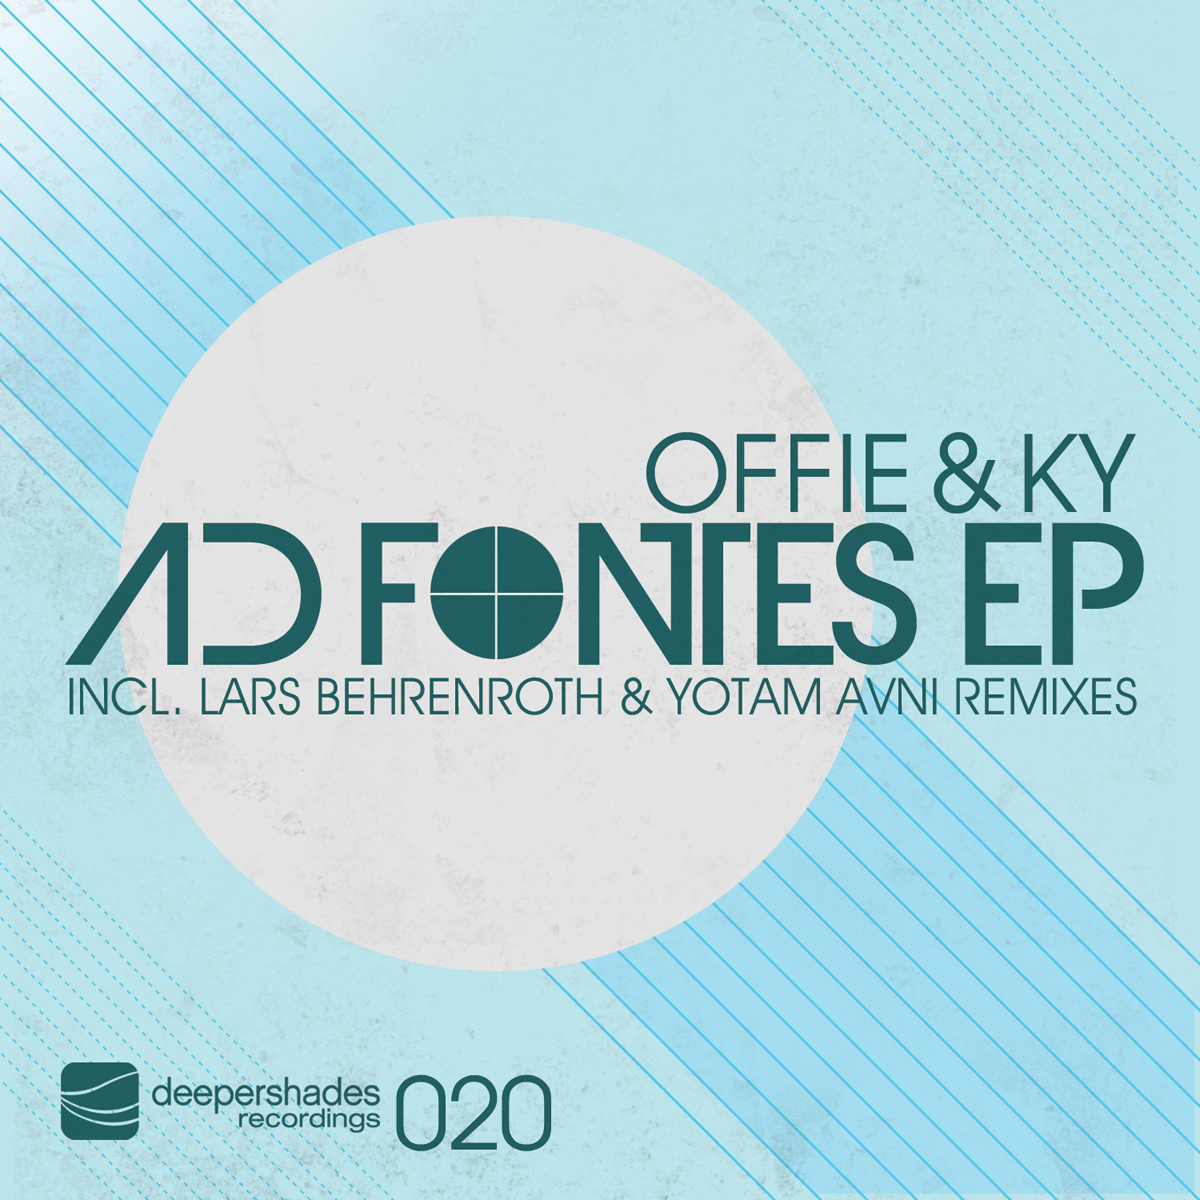 #nowplaying on radio.deepershades.net : Offie & Ky - Ad Fontes (Lars Behrenroth Remix) #deephouse #livestream #dsoh #housemusic